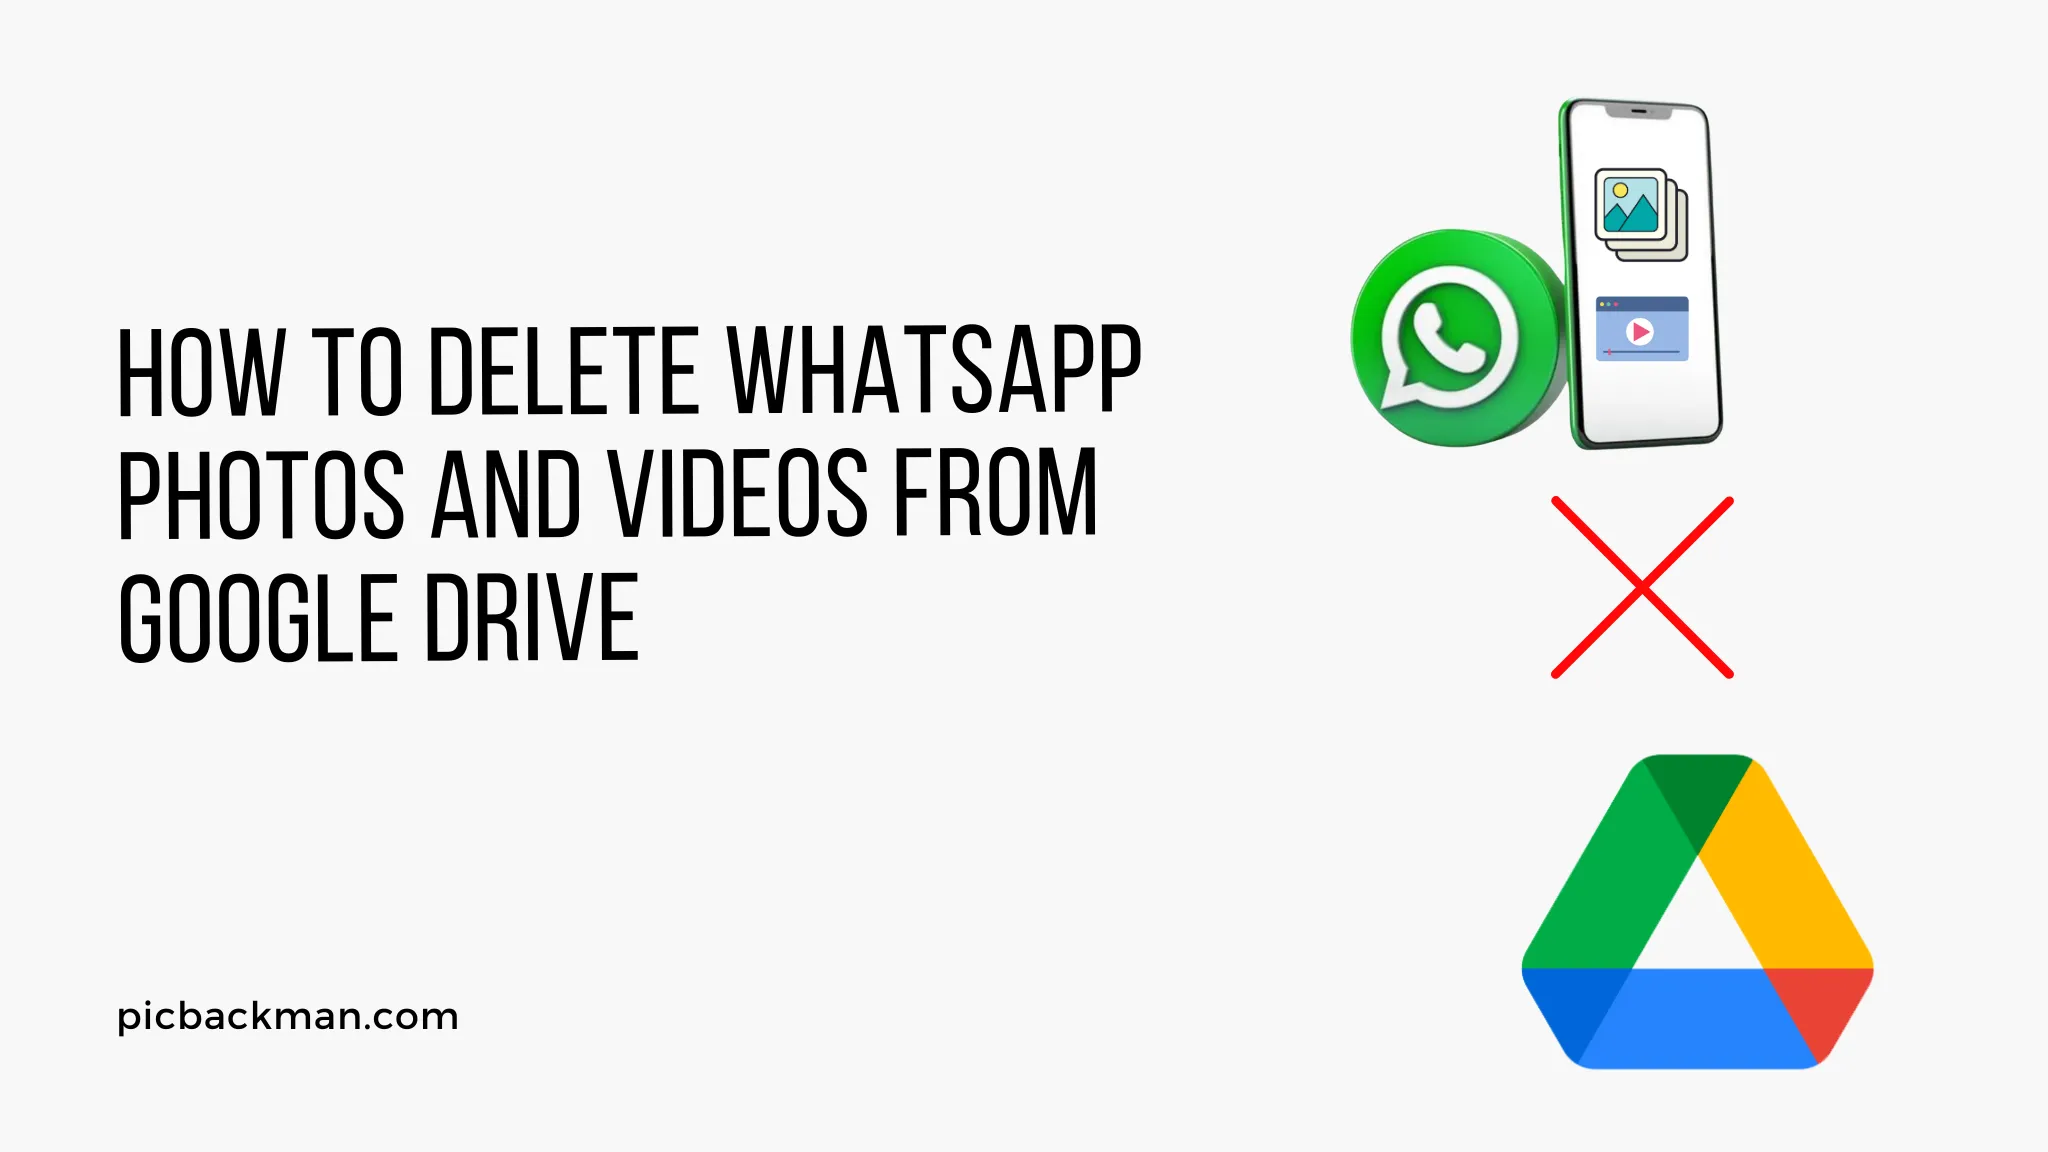 How to Delete WhatsApp Photos and Videos from Google Drive?